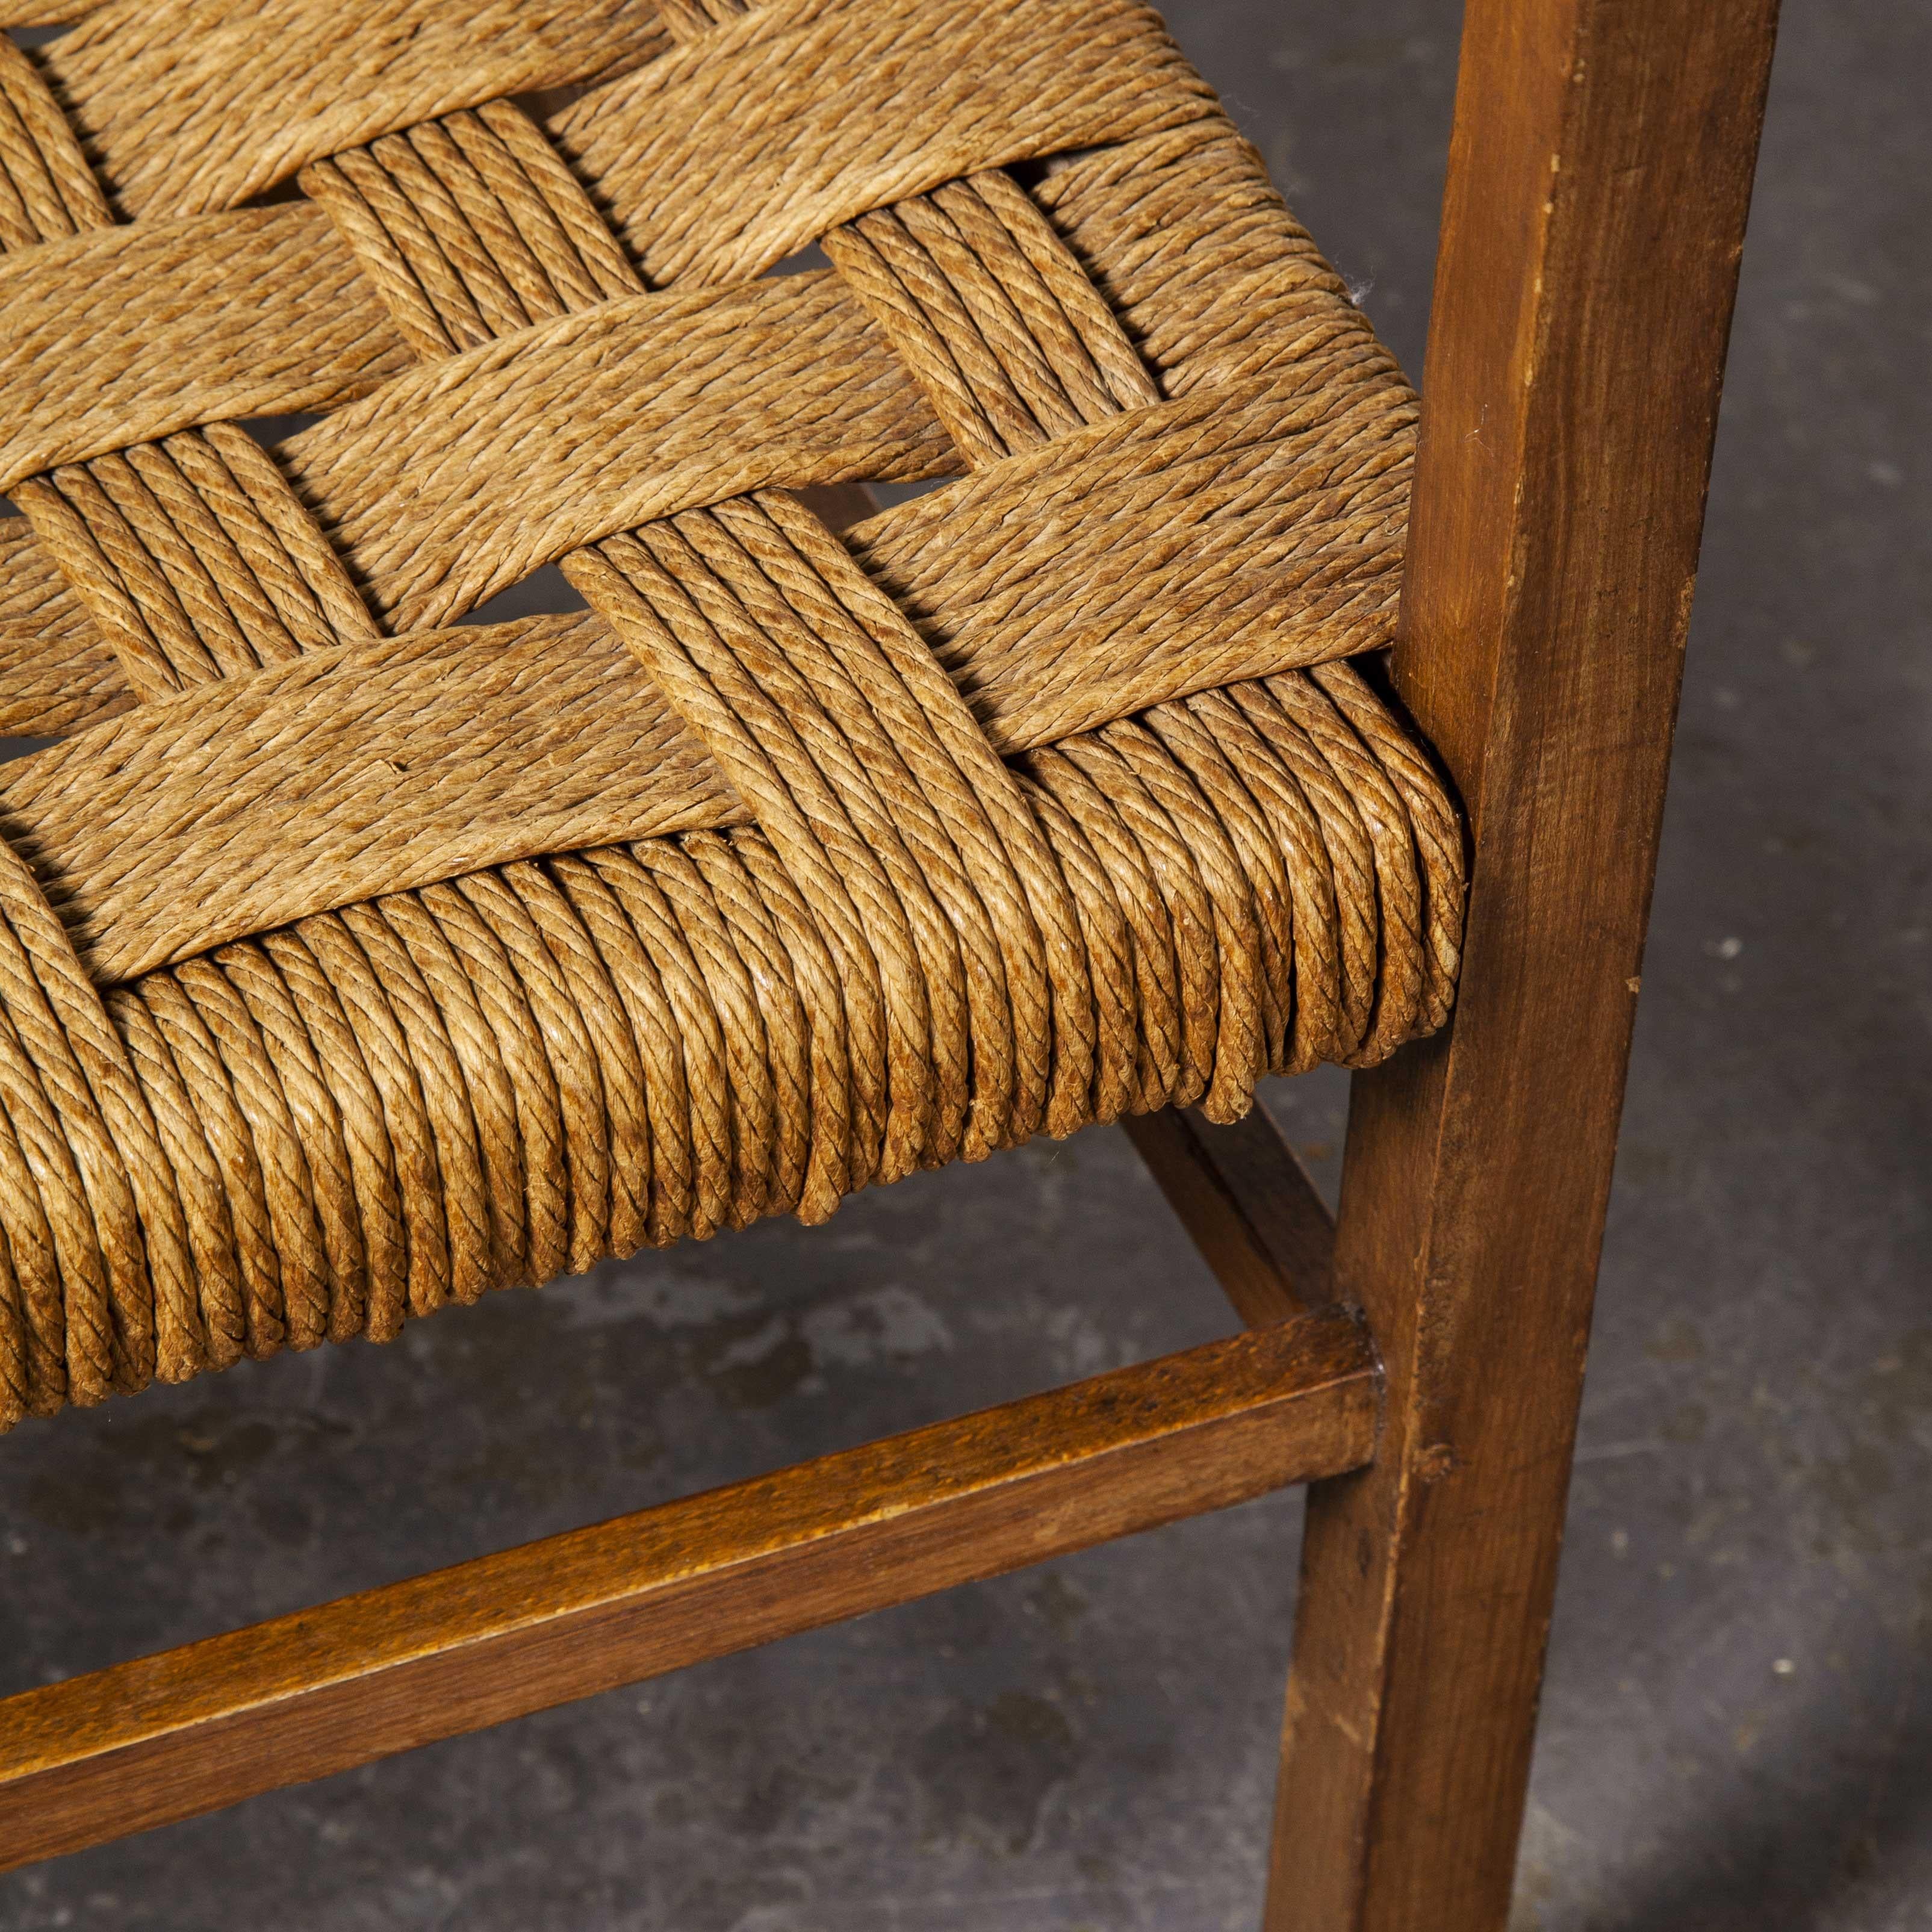 Pair of 1950s French woven rush seated armchairs

Pair of 1950s French woven rush seated armchairs. An elegant pair of oak framed arm chairs with refined slatted backs and sculptural arms. The seats retain their original handwoven seagrass which has